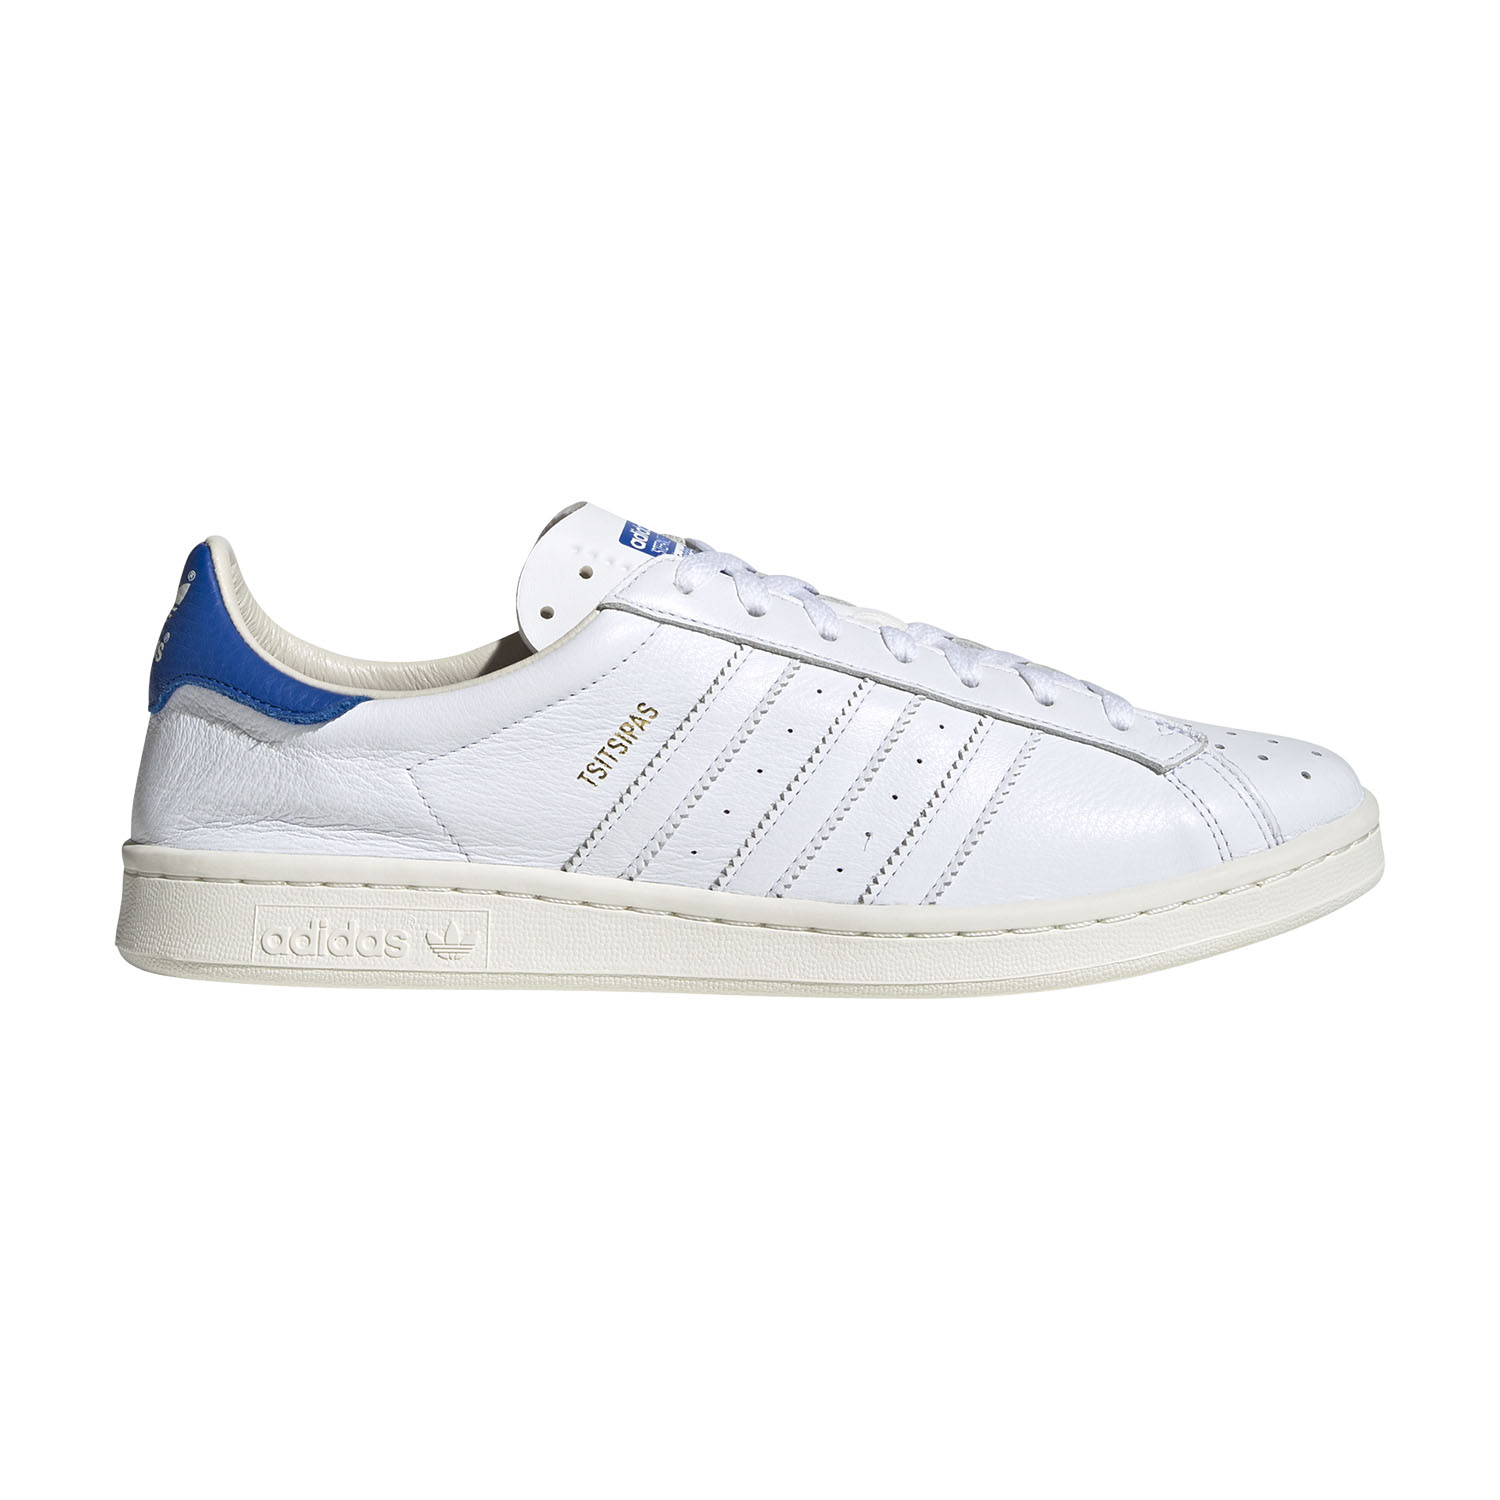 adidas Earlham Men's Tennis Shoes - Feather White/Blue